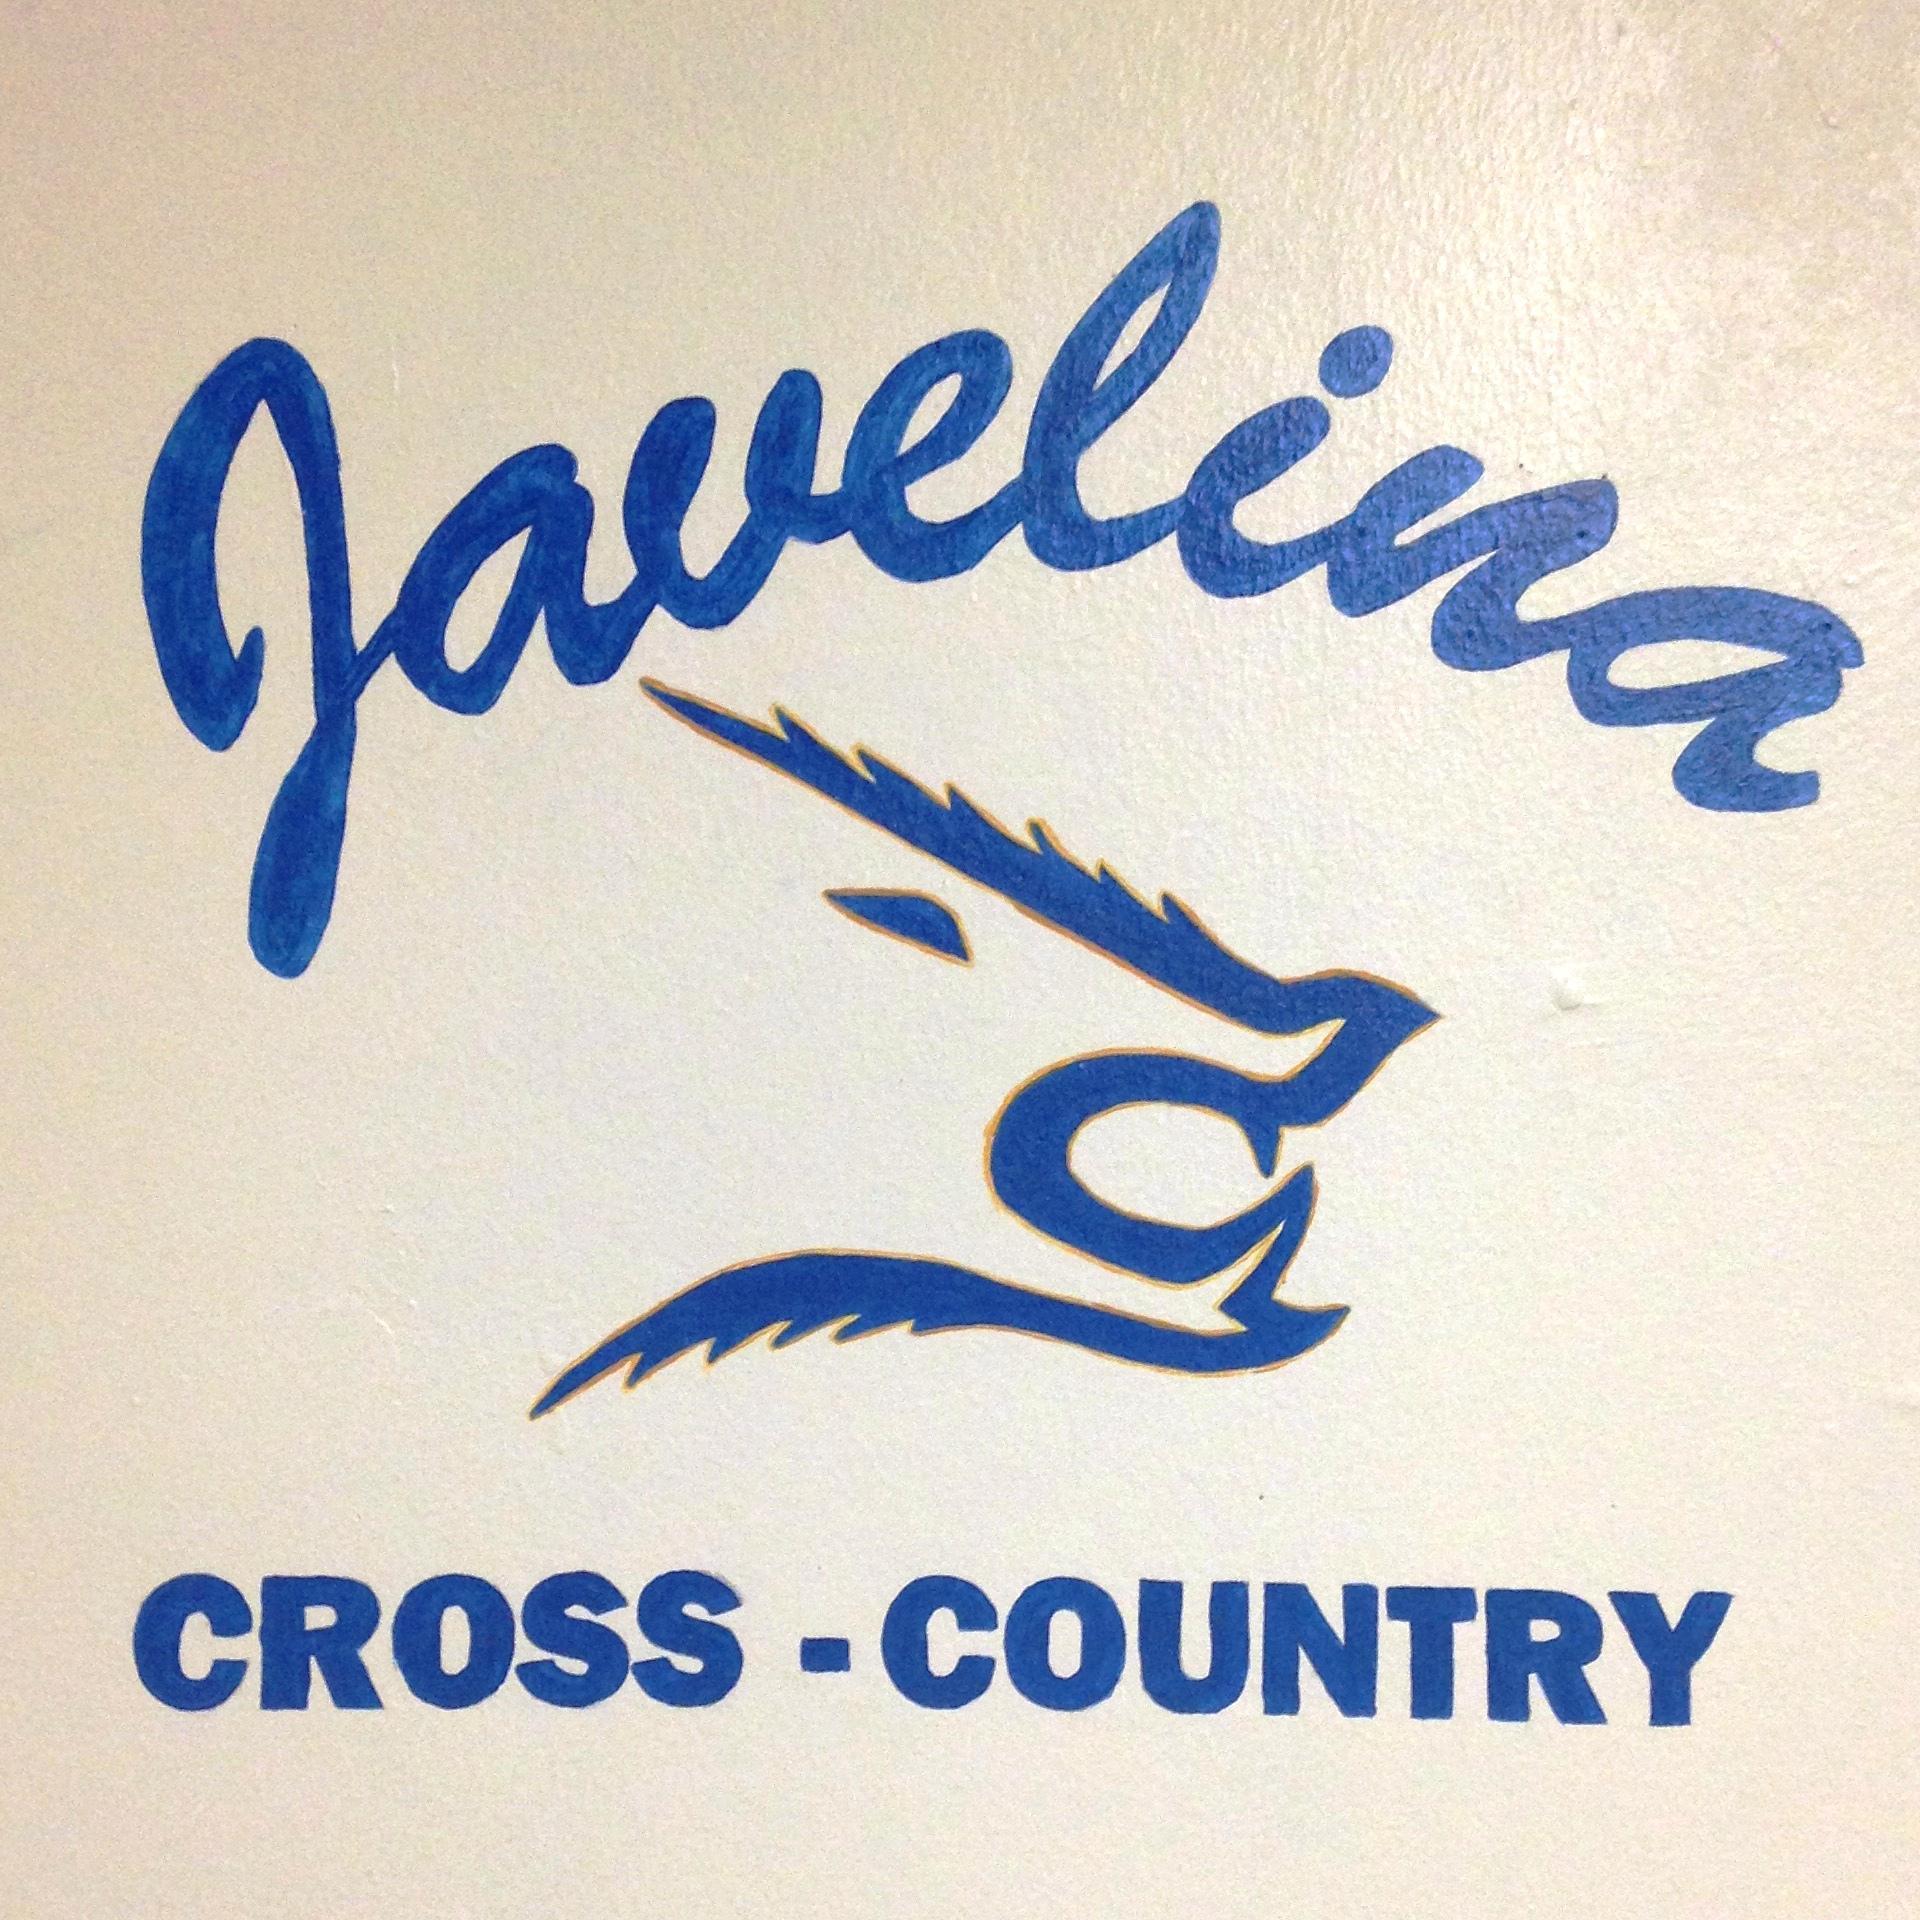 The official Twitter account of Texas A&M University-Kingsville cross country #JavelinaSTRONG